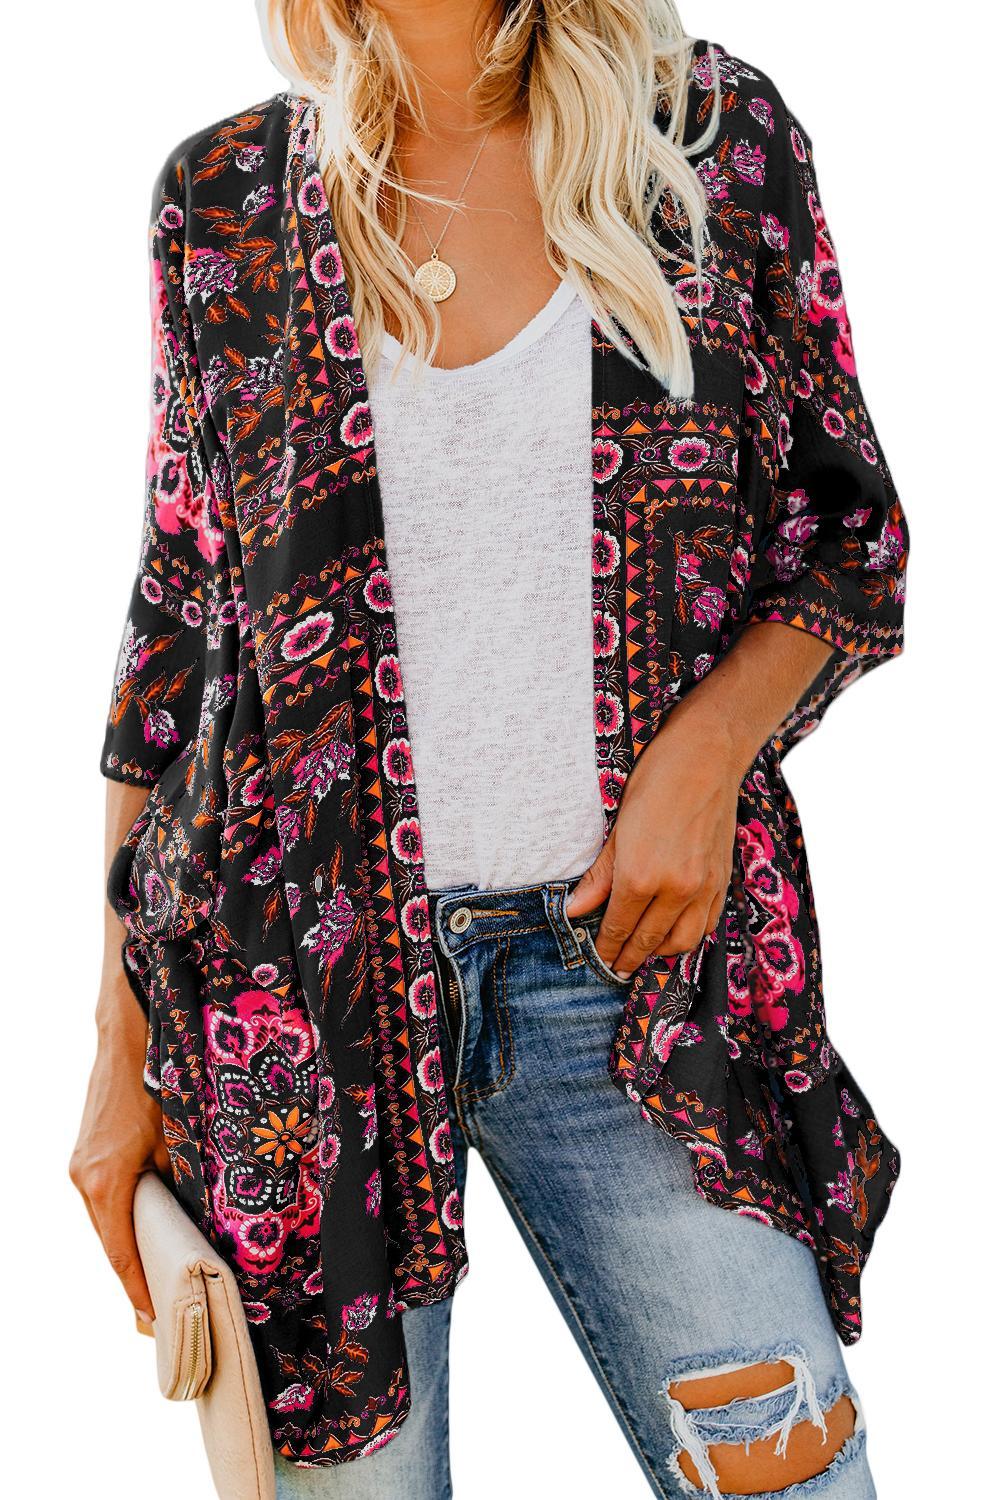 US$ 10.35 Black Floral Kimono Cardigan Open Front Cover Up Wholesale